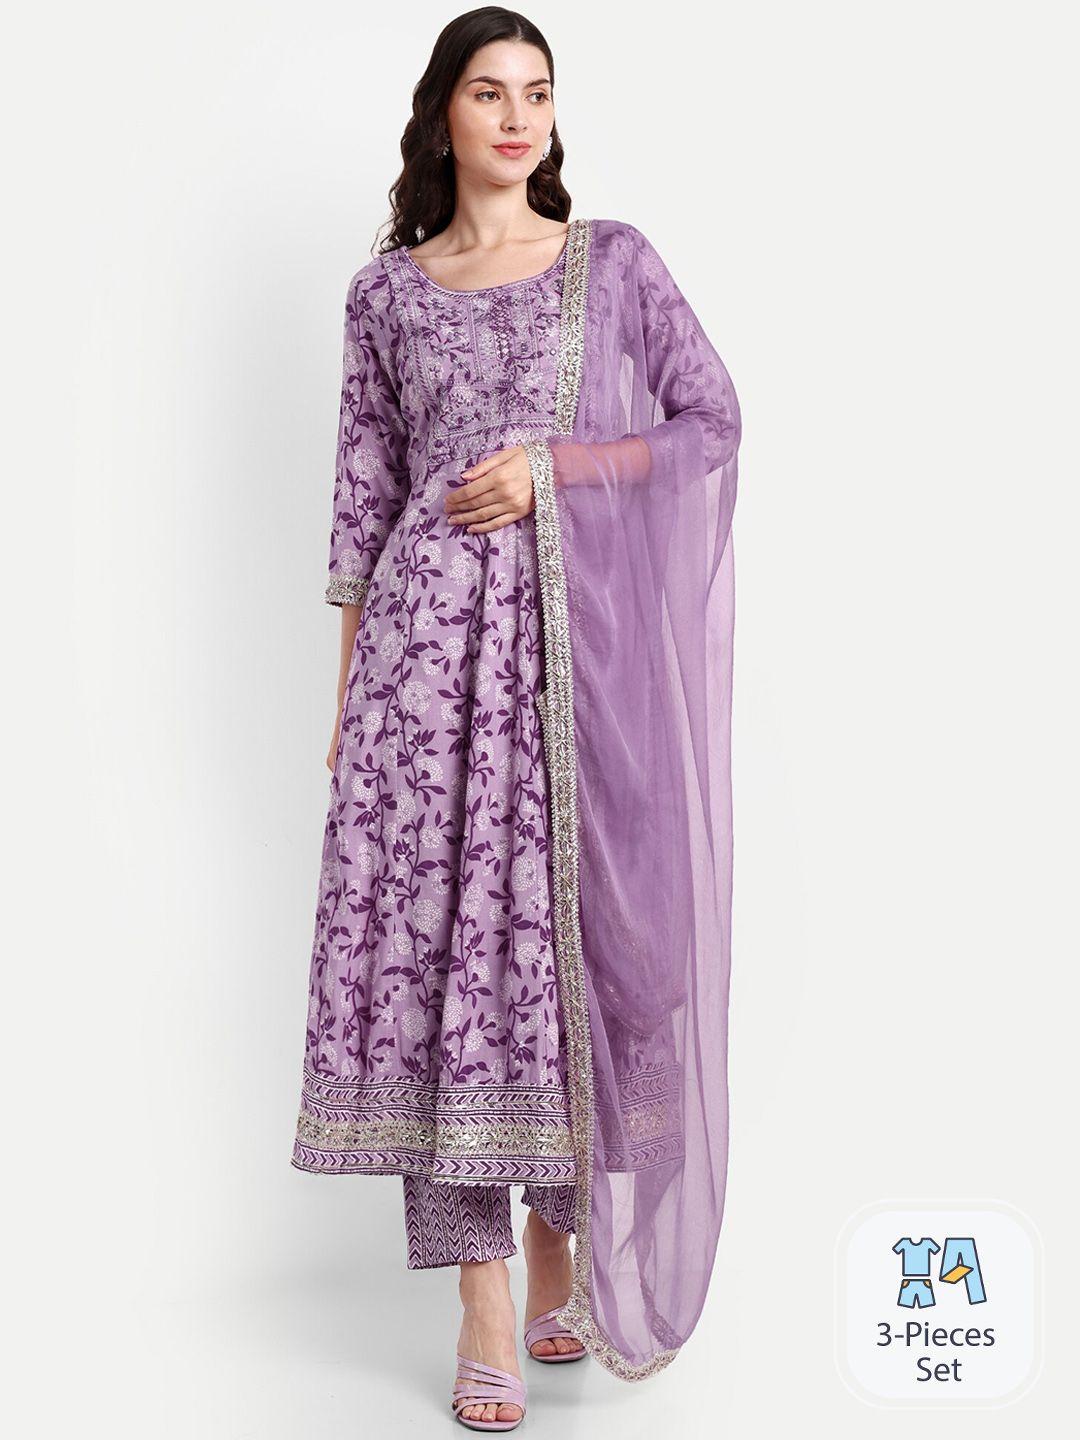 singni-women-lavender-floral-printed-regular-thread-work-pure-cotton-kurta-with-trousers-&-with-dupatta